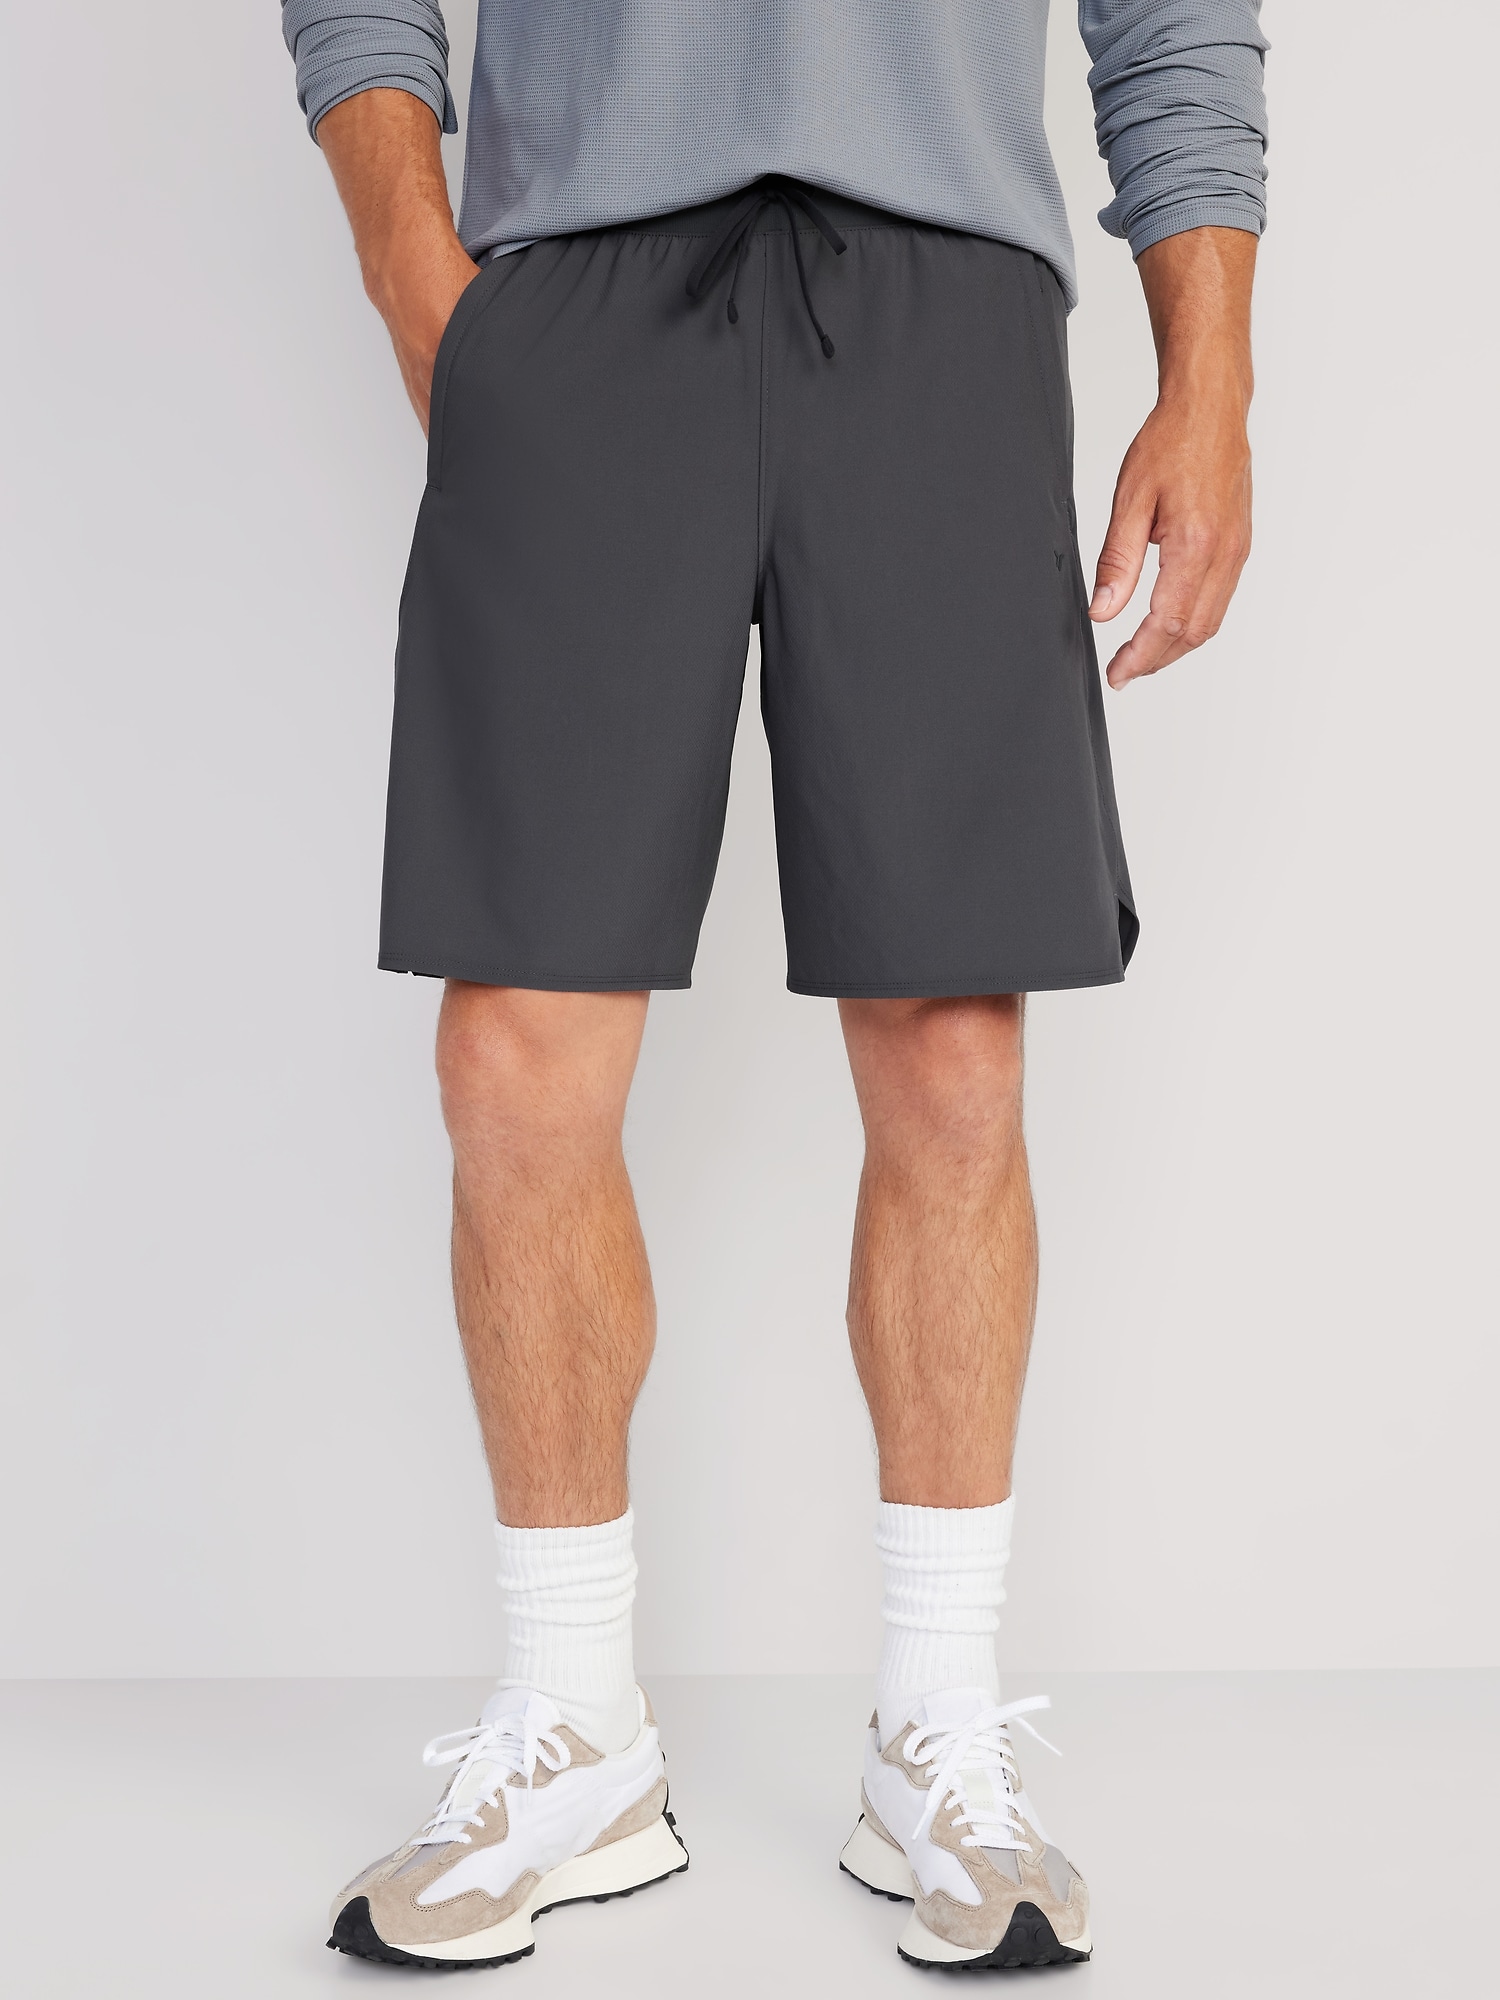 Go Workout Shorts -- 9-inch inseam Hot Deal